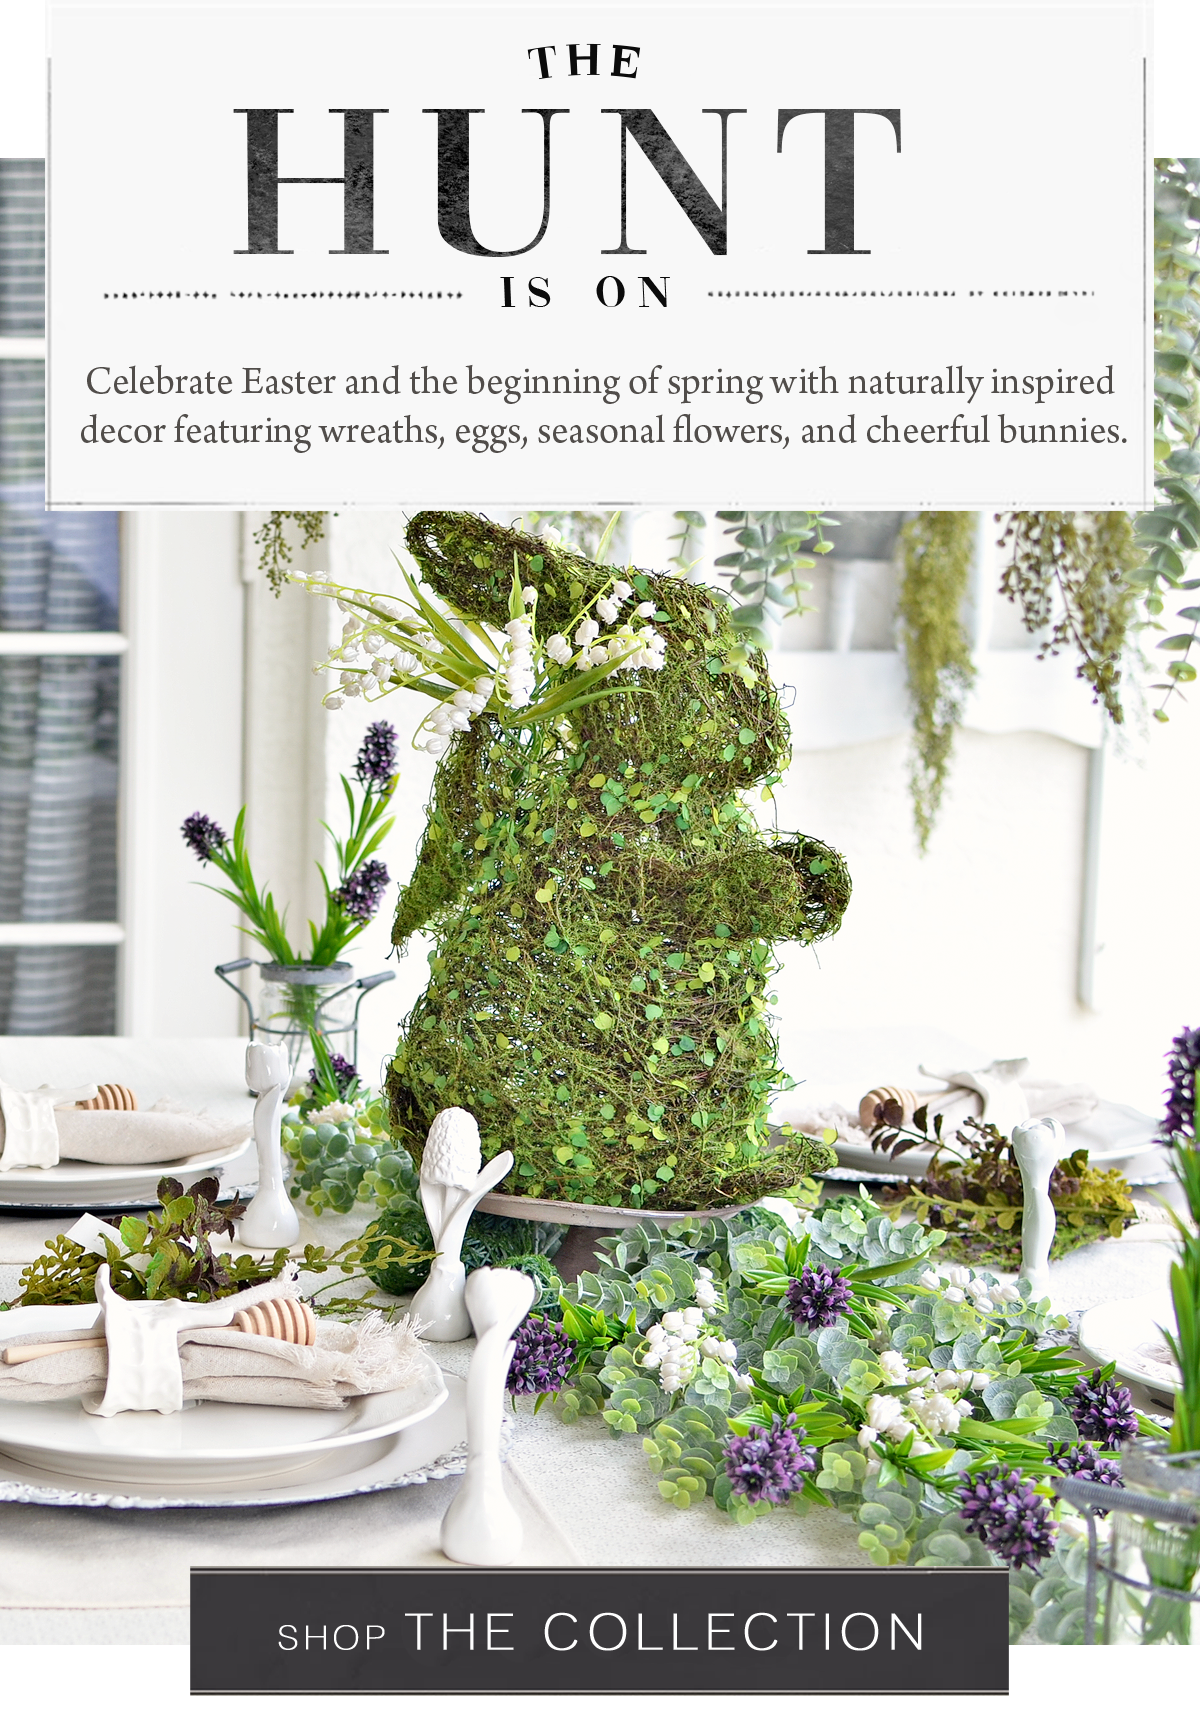 The Hunt is on. Celebrate Easter and the beginning of spring with naturally inspired decor featuring wreaths, eggs, seasonal flowers, and cheerful bunnies. Shop The Collection.